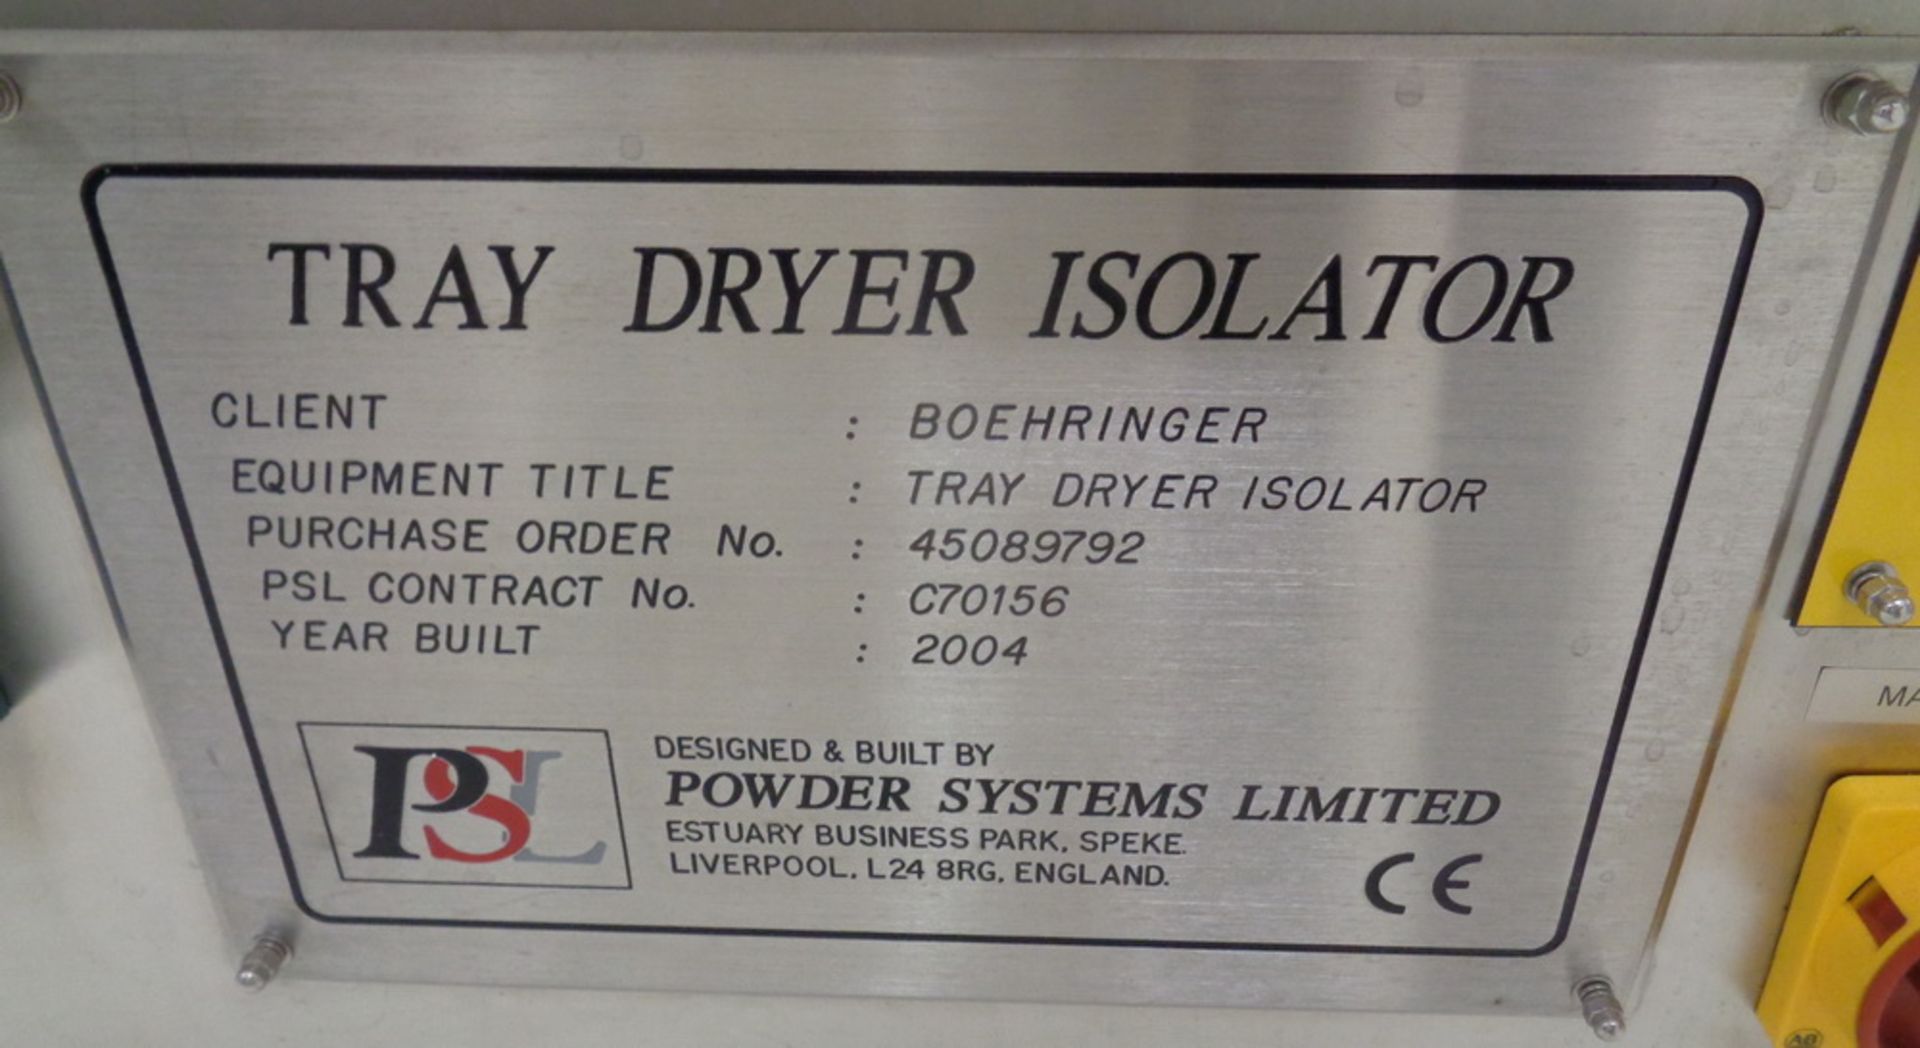 Powder Systems Limited(PSL) Tray Dryer Stainless Steel Isolator, complete with 4 tray oven - Image 7 of 14